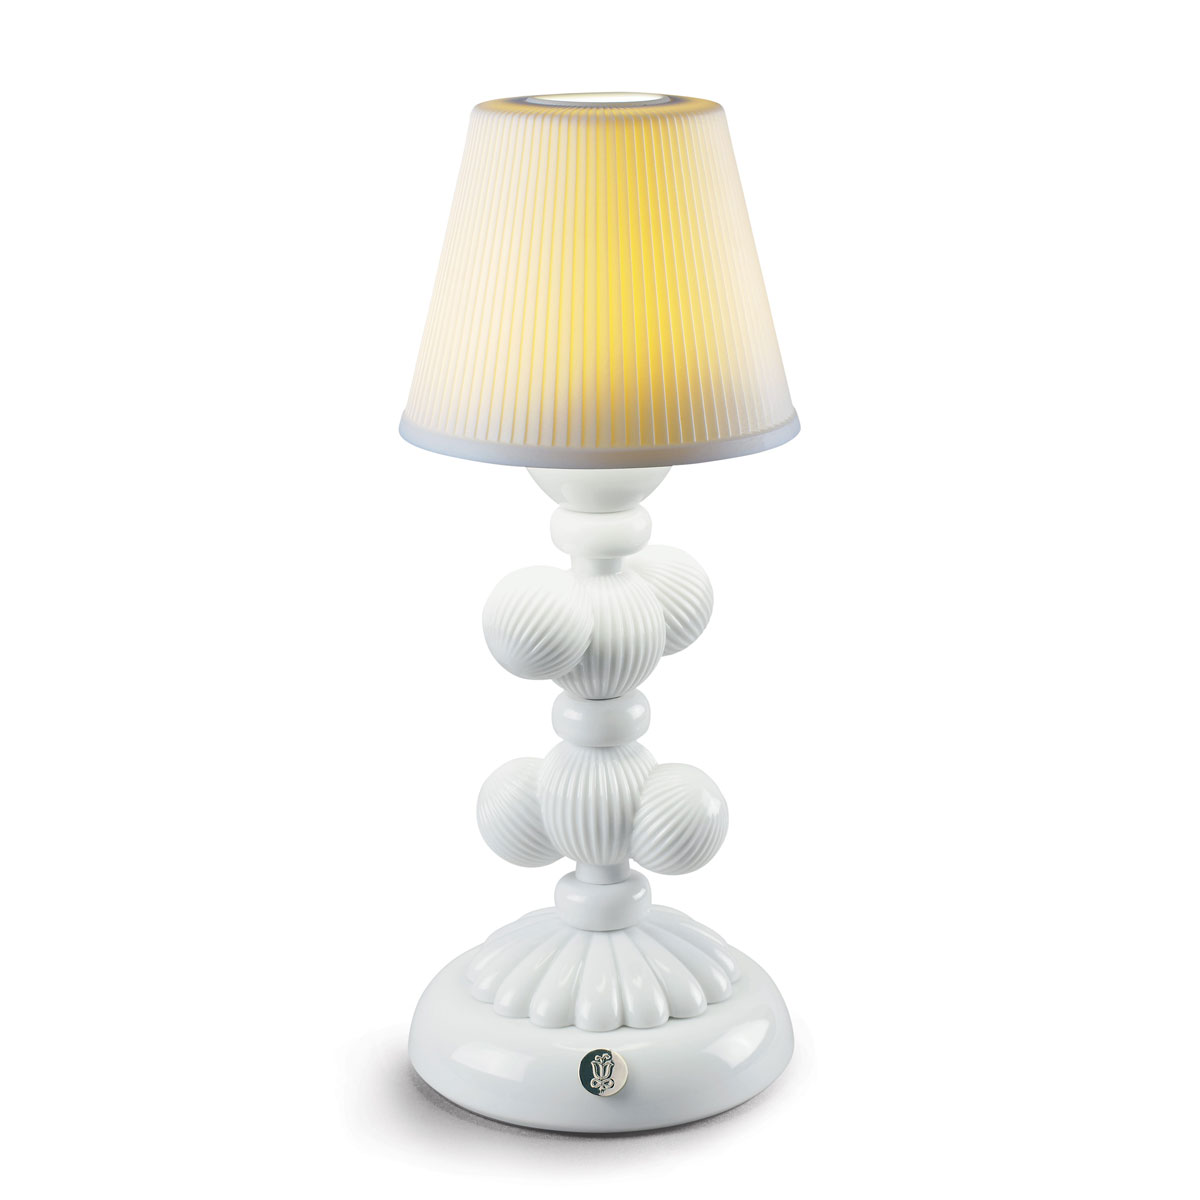 Lladro Light And Fragrance, Cactus Firefly Table Lamp. White